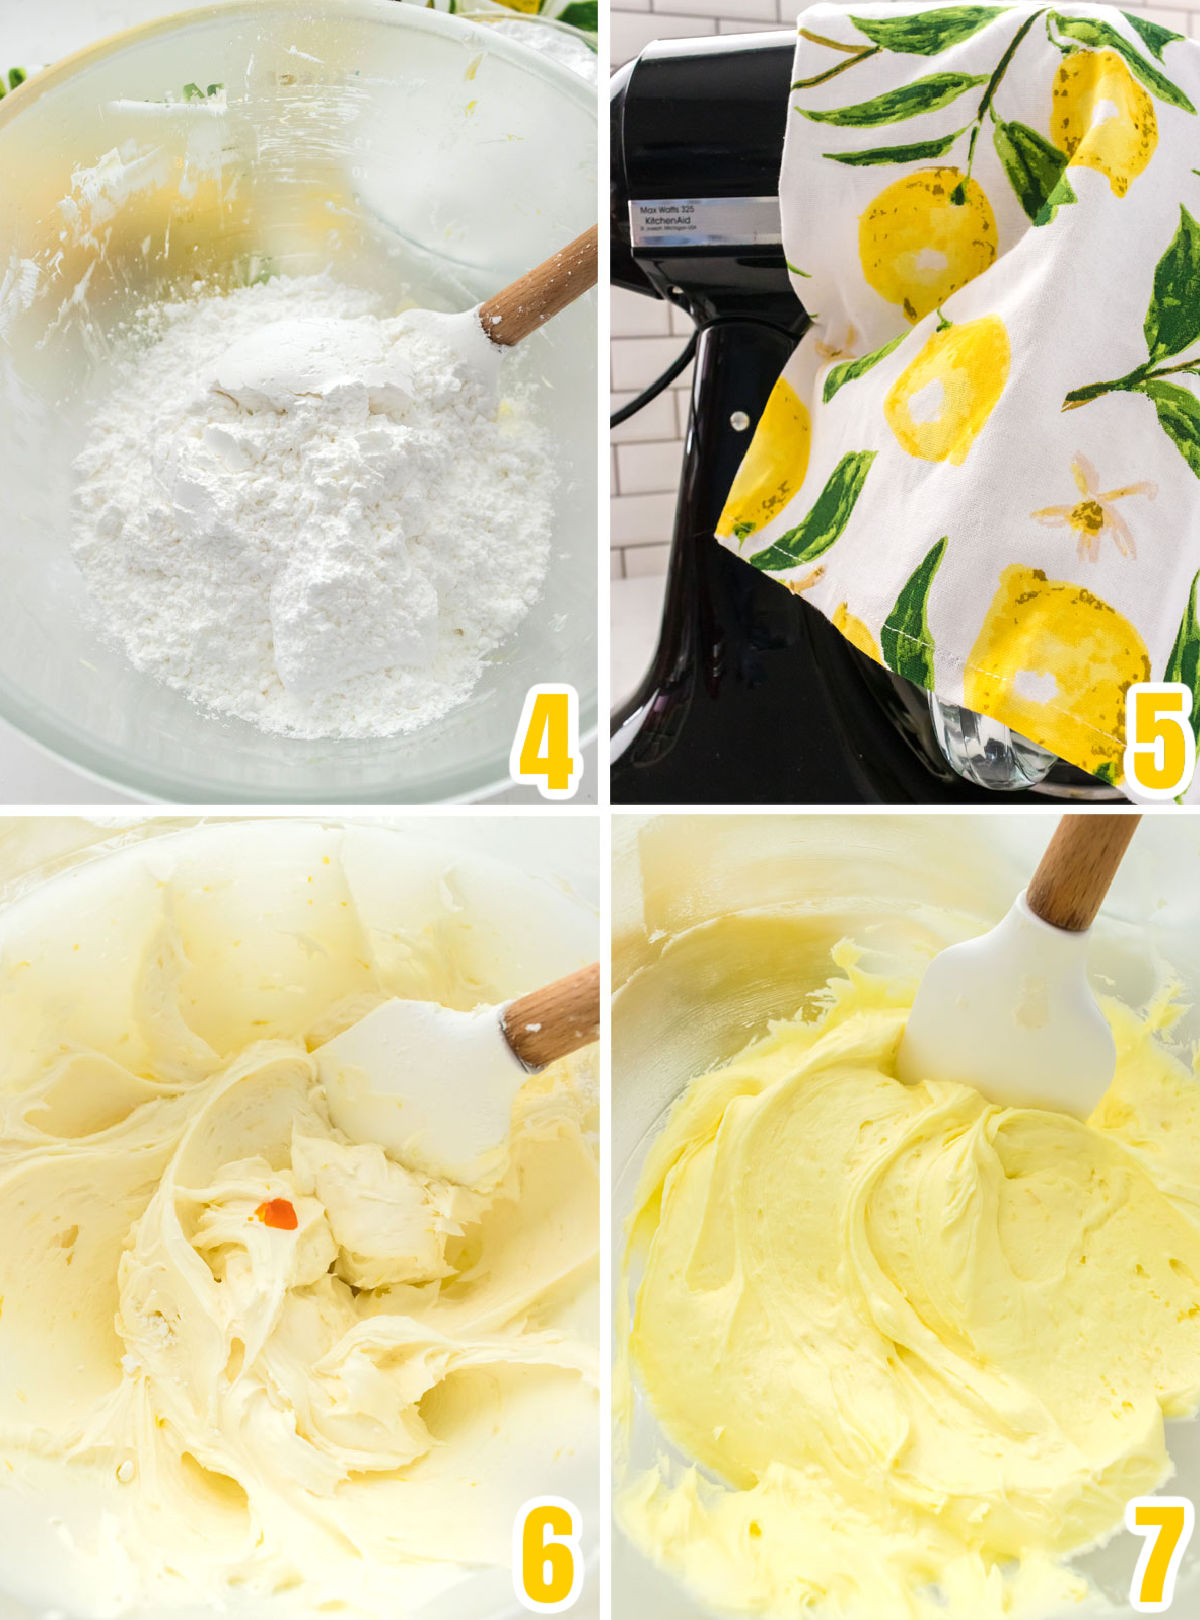 Collage image showing how to add the powdered sugar to the frosting mixture.